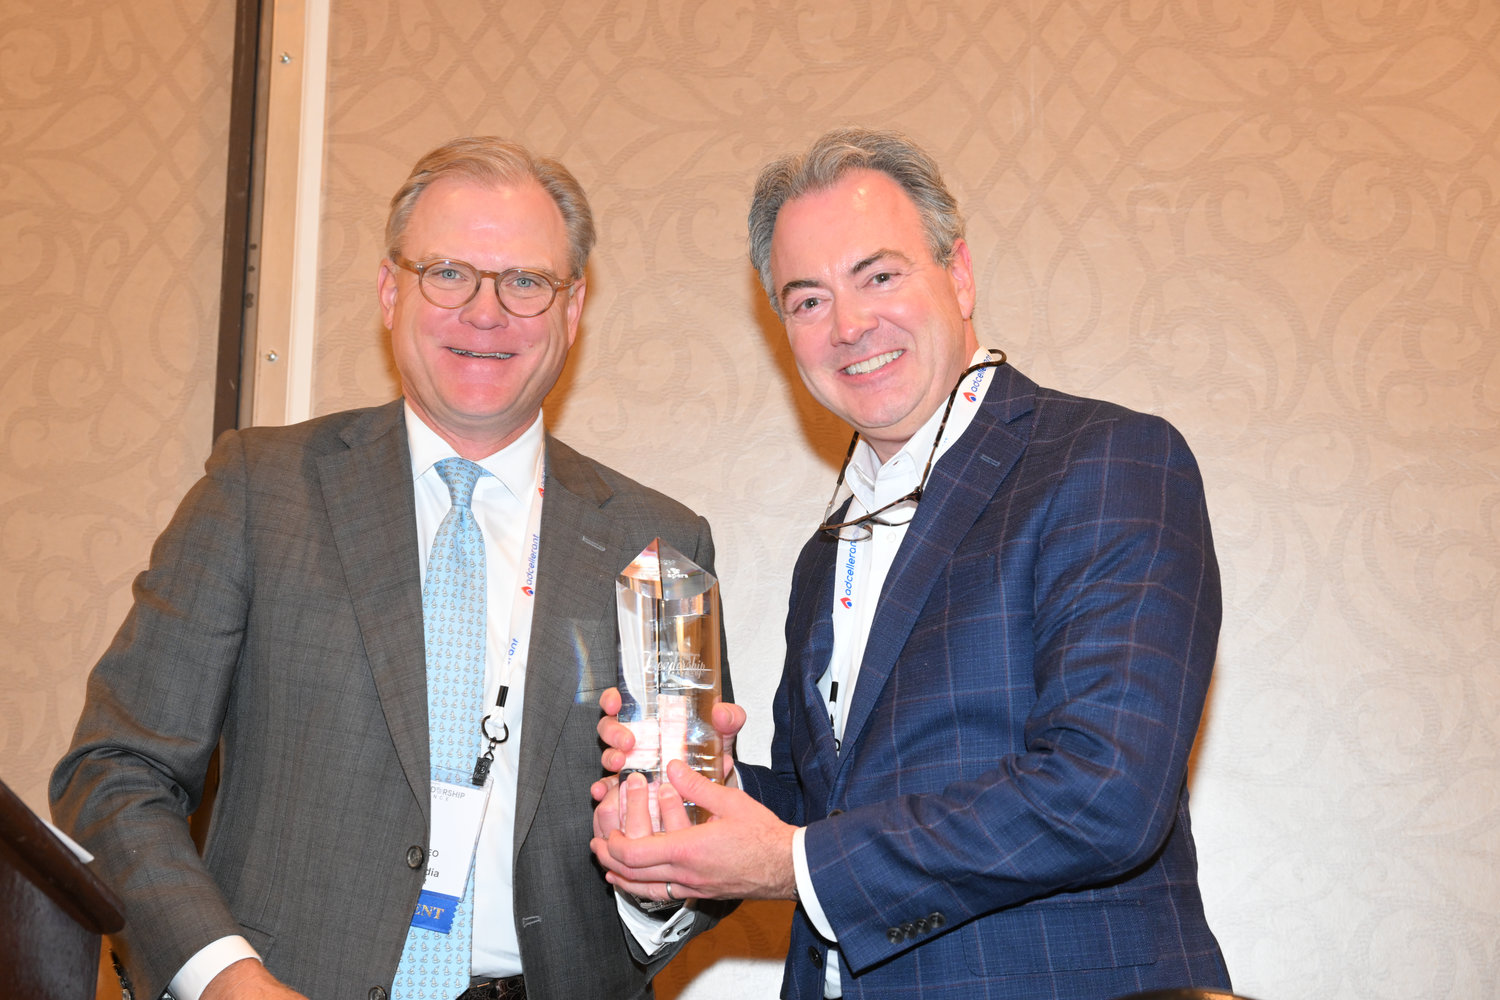 Nat Lea, president and CEO of WEHCO Media, and Chris Reen, the 2022 recipient of the Frank W. Mayborn Leadership Award. (Photo by Jeff Strout)